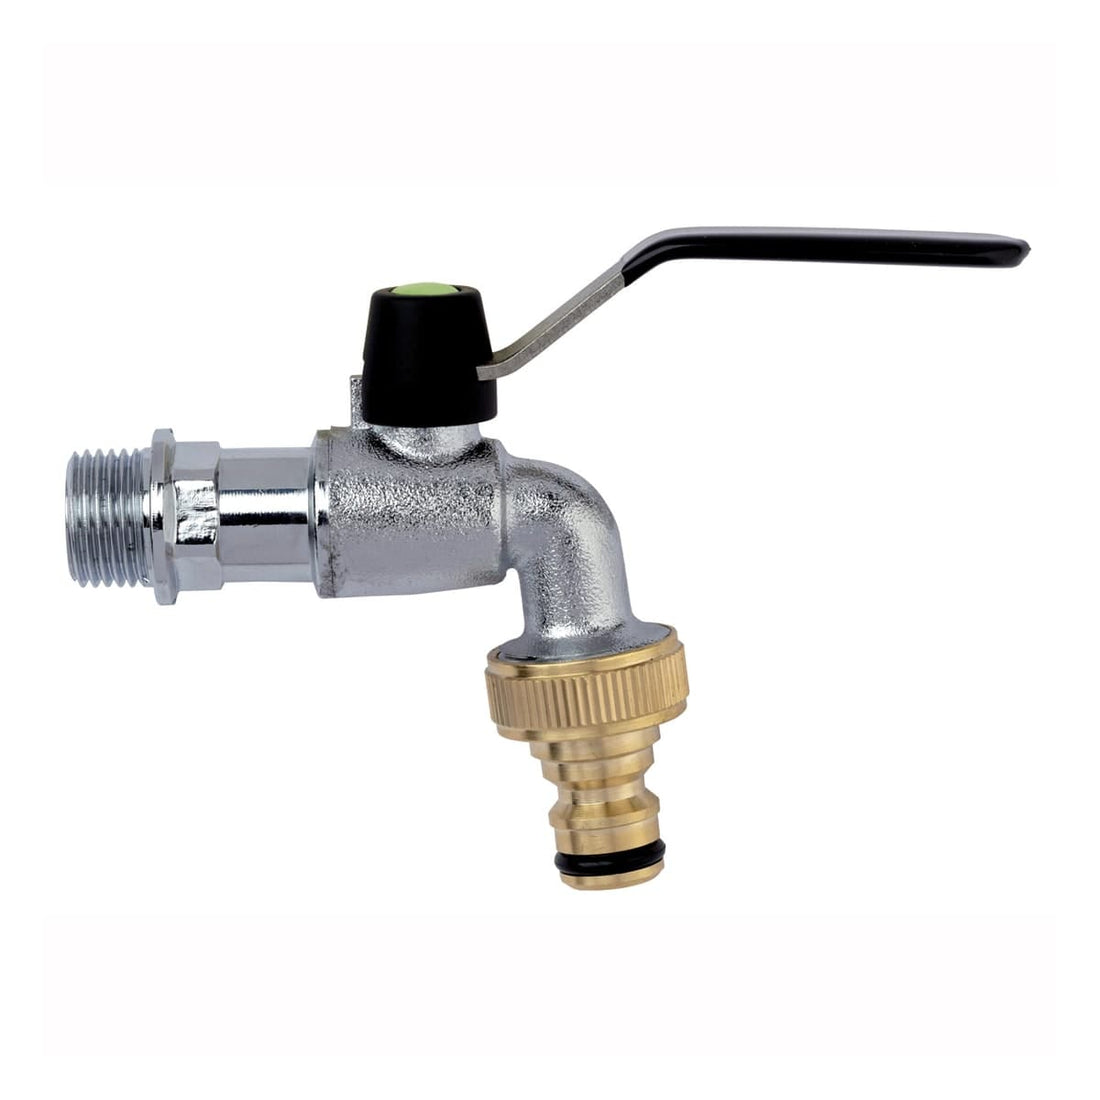 GARDEN BALL VALVE WITH QUICK-ACTION OUTLET - best price from Maltashopper.com BR500413047